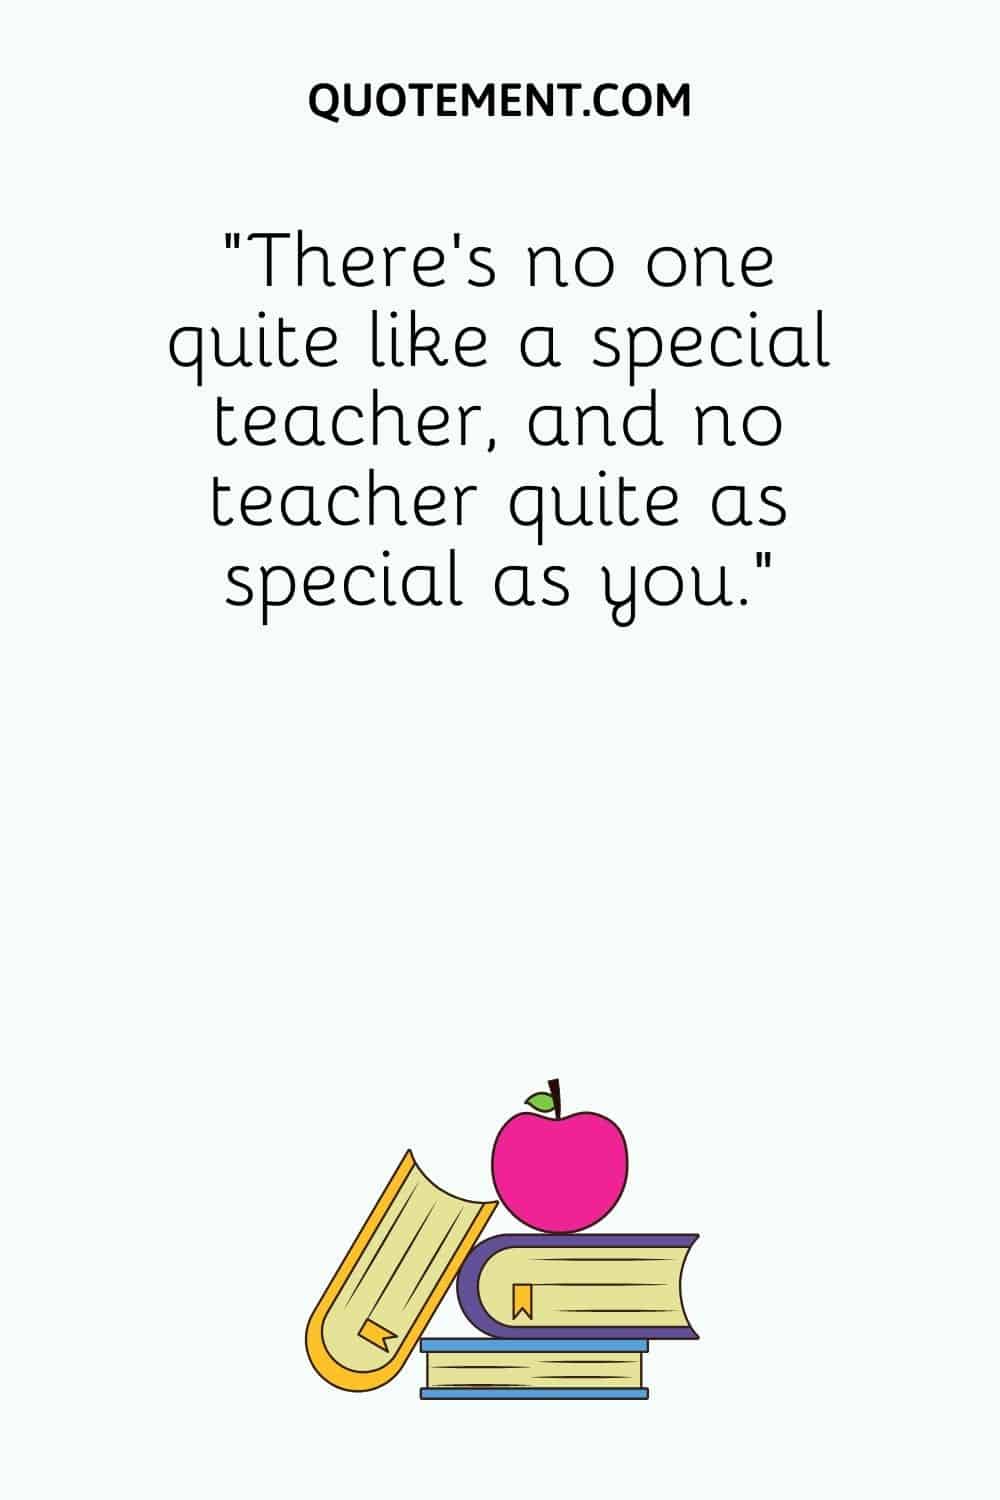 There's no one quite like a special teacher, and no teacher quite as special as you.